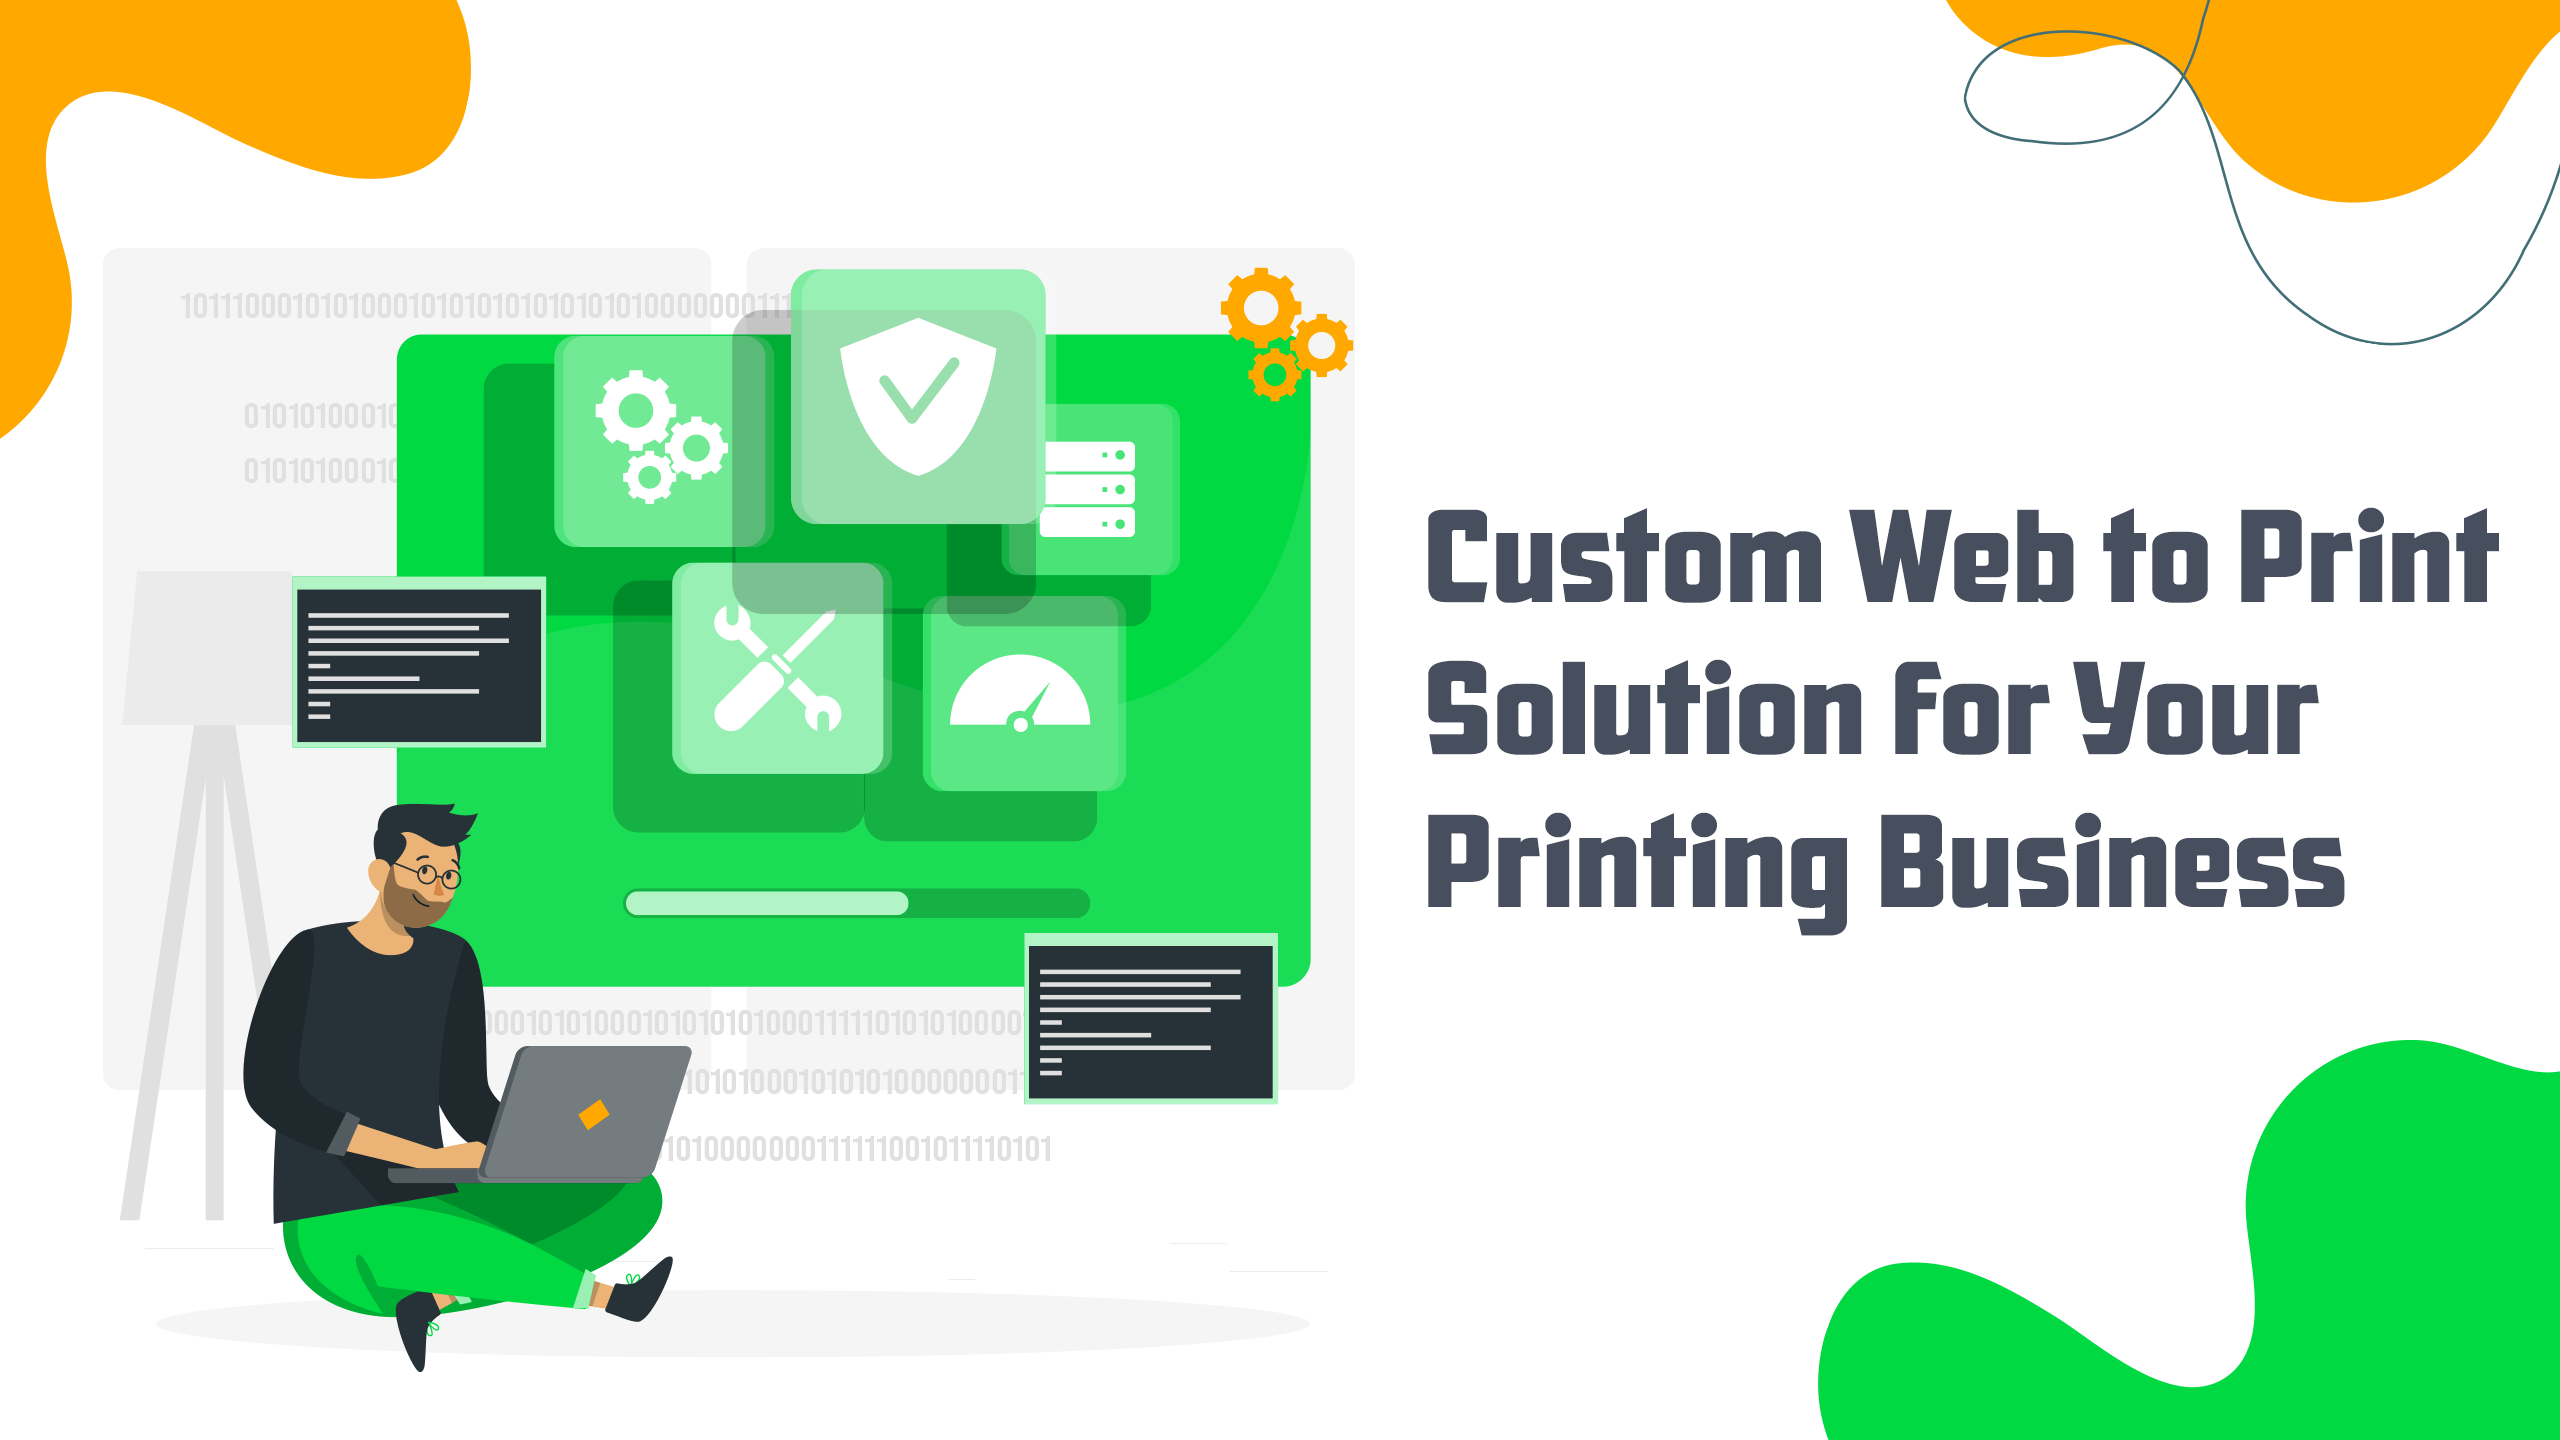 Custom Web to Print Solution for Your Printing Business